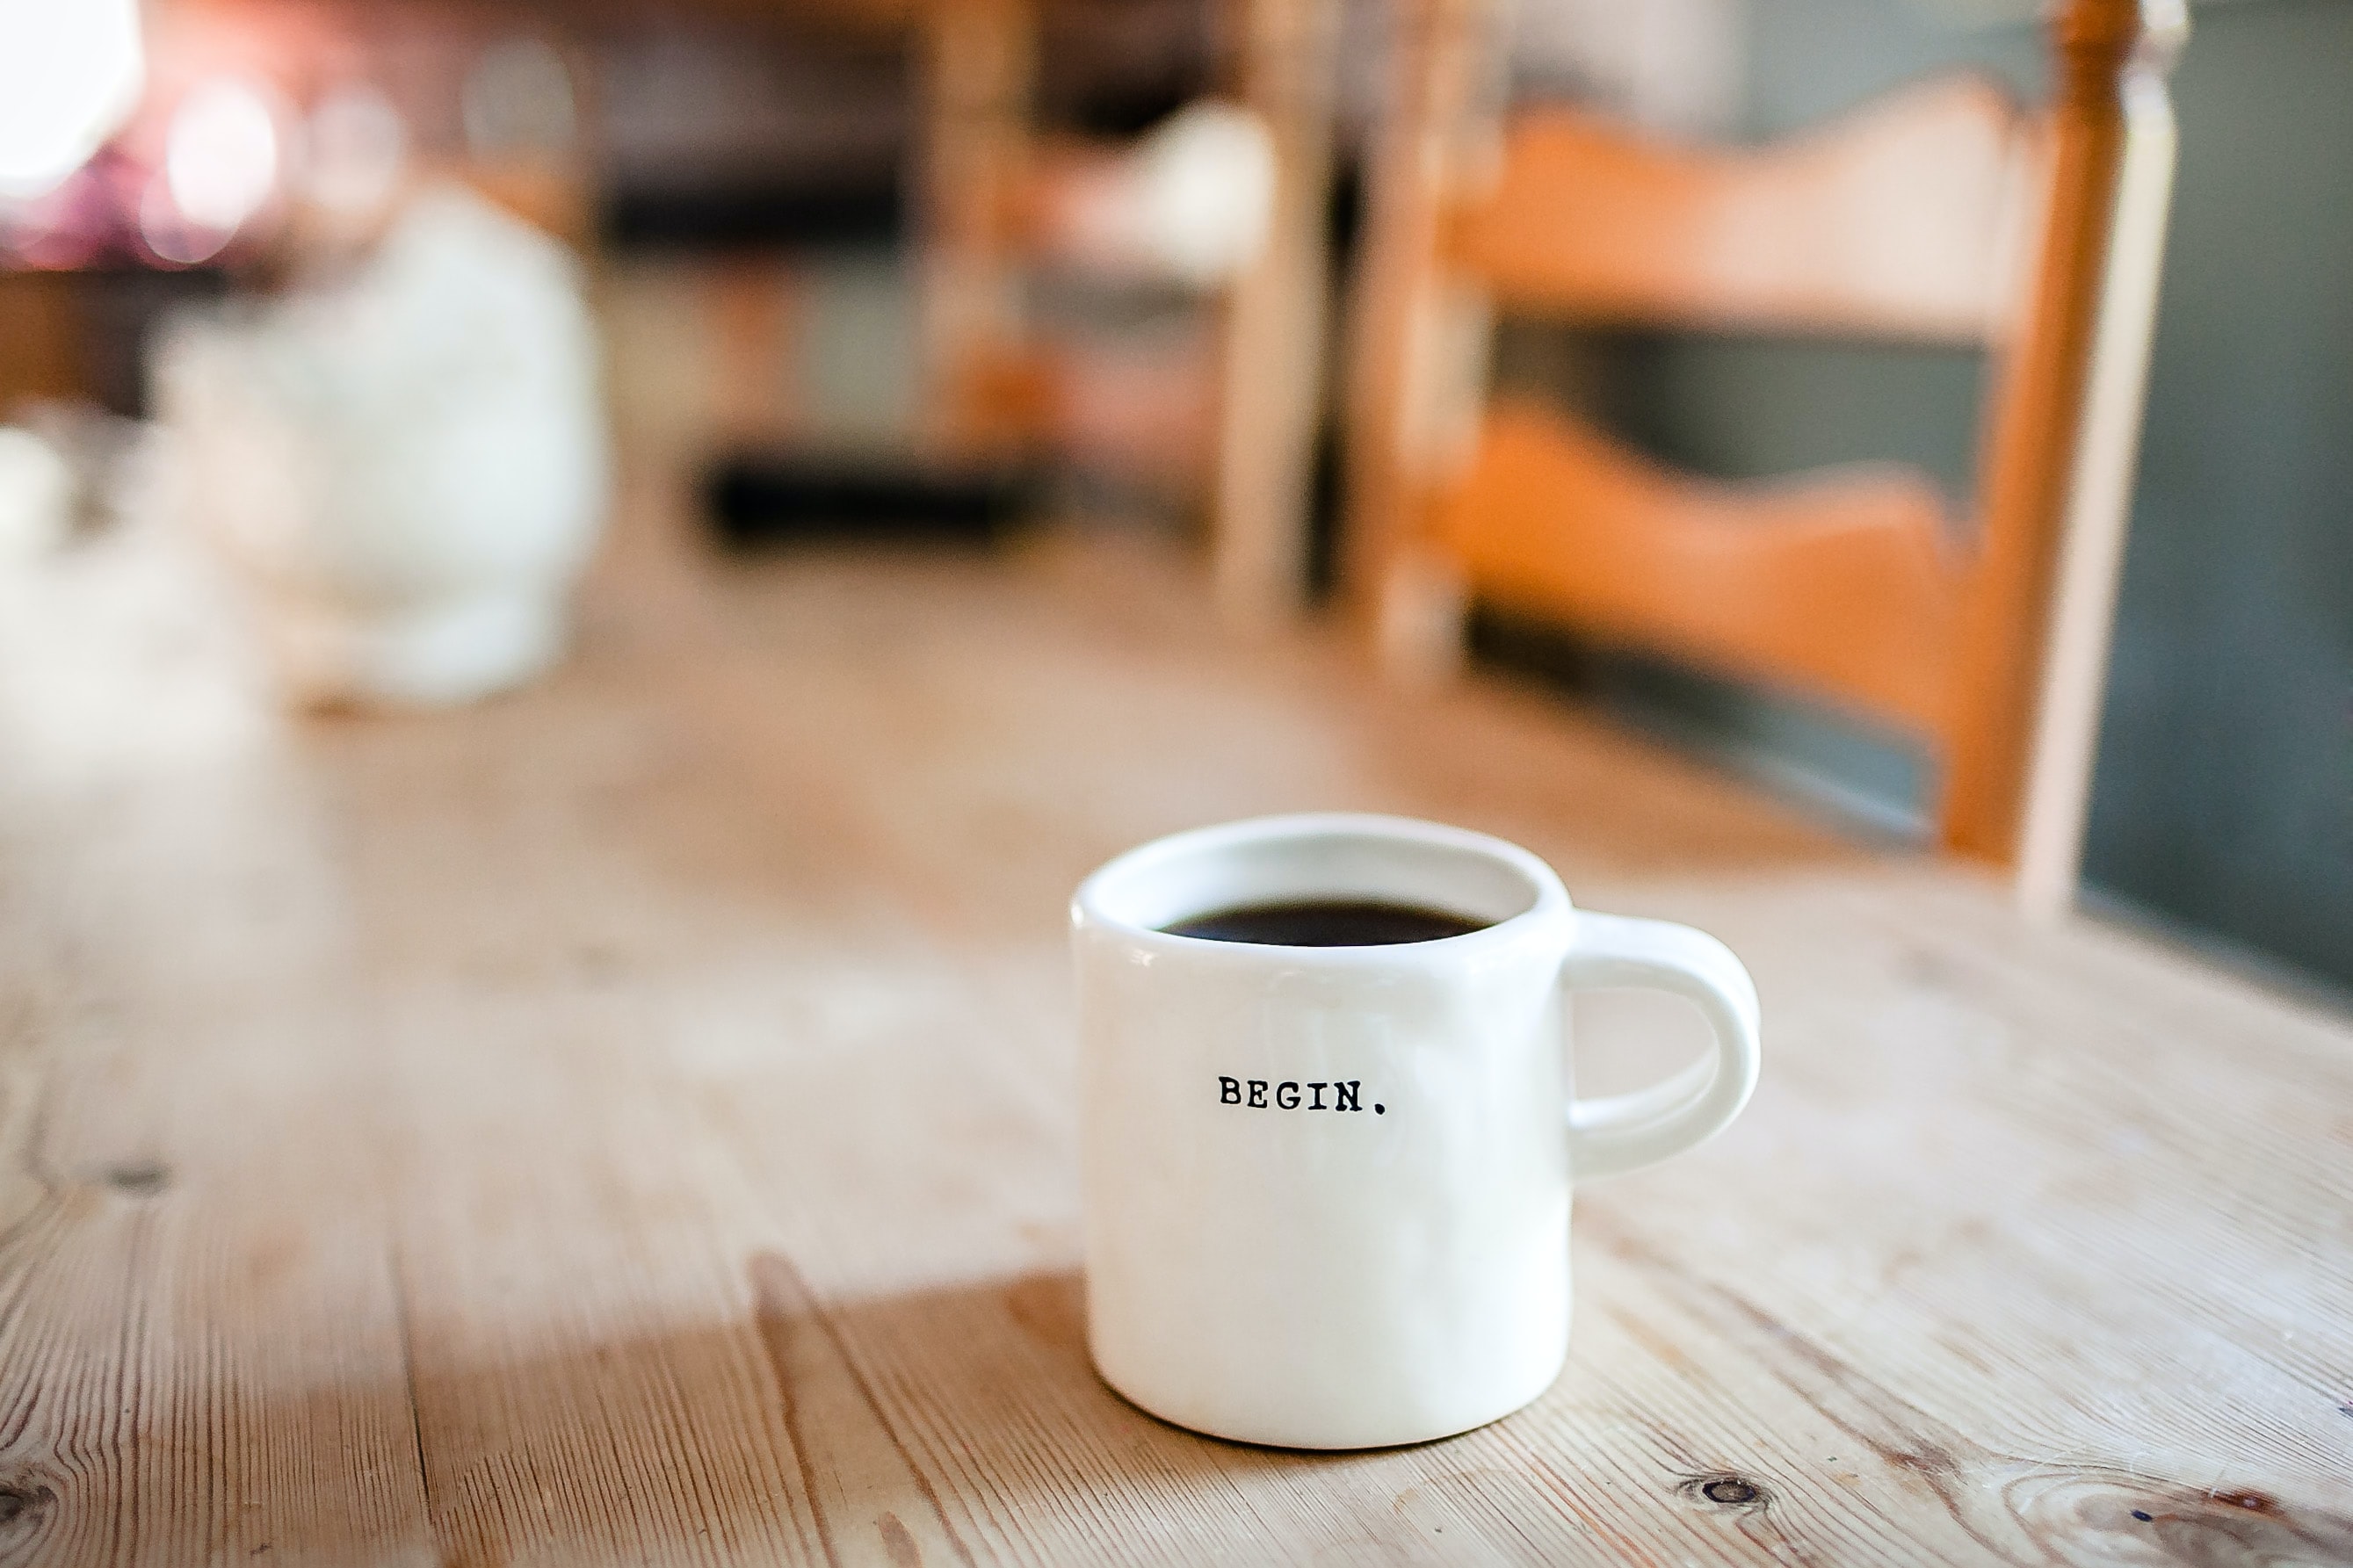 White coffee cup on table with the word "begin" on it